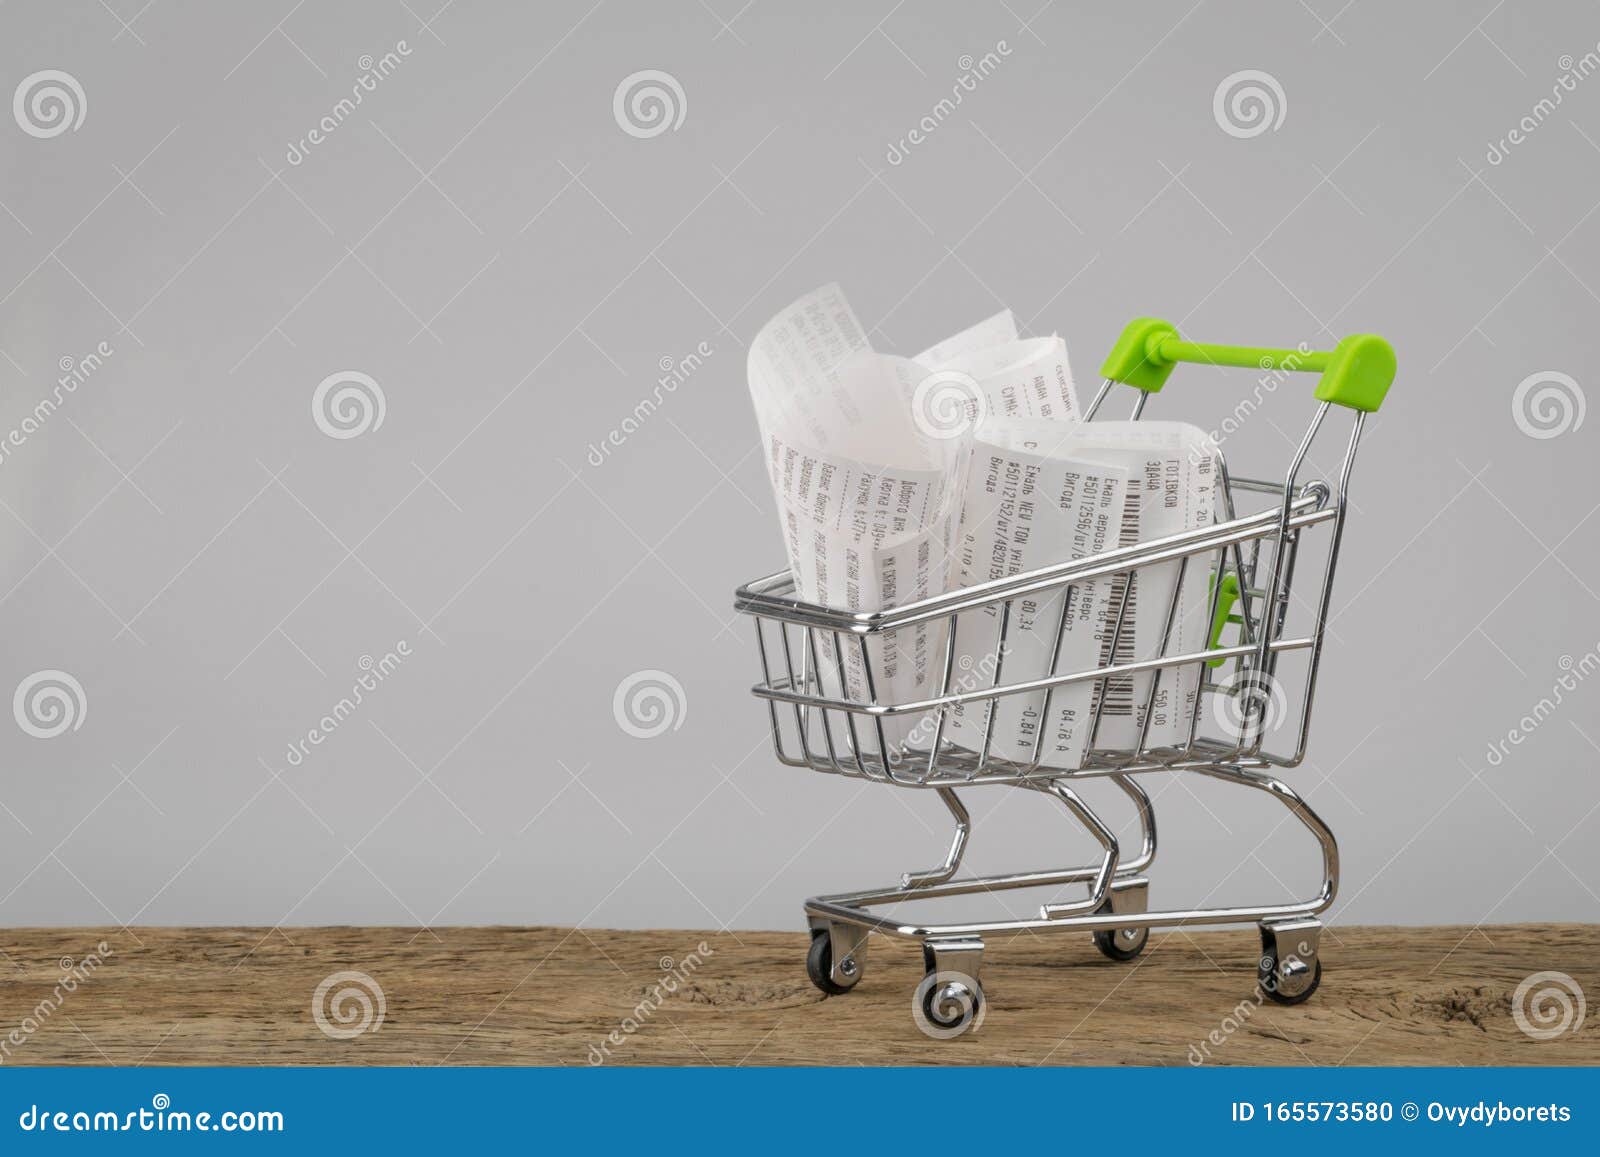 shopping cart, concept for grocery expenses and consumerism